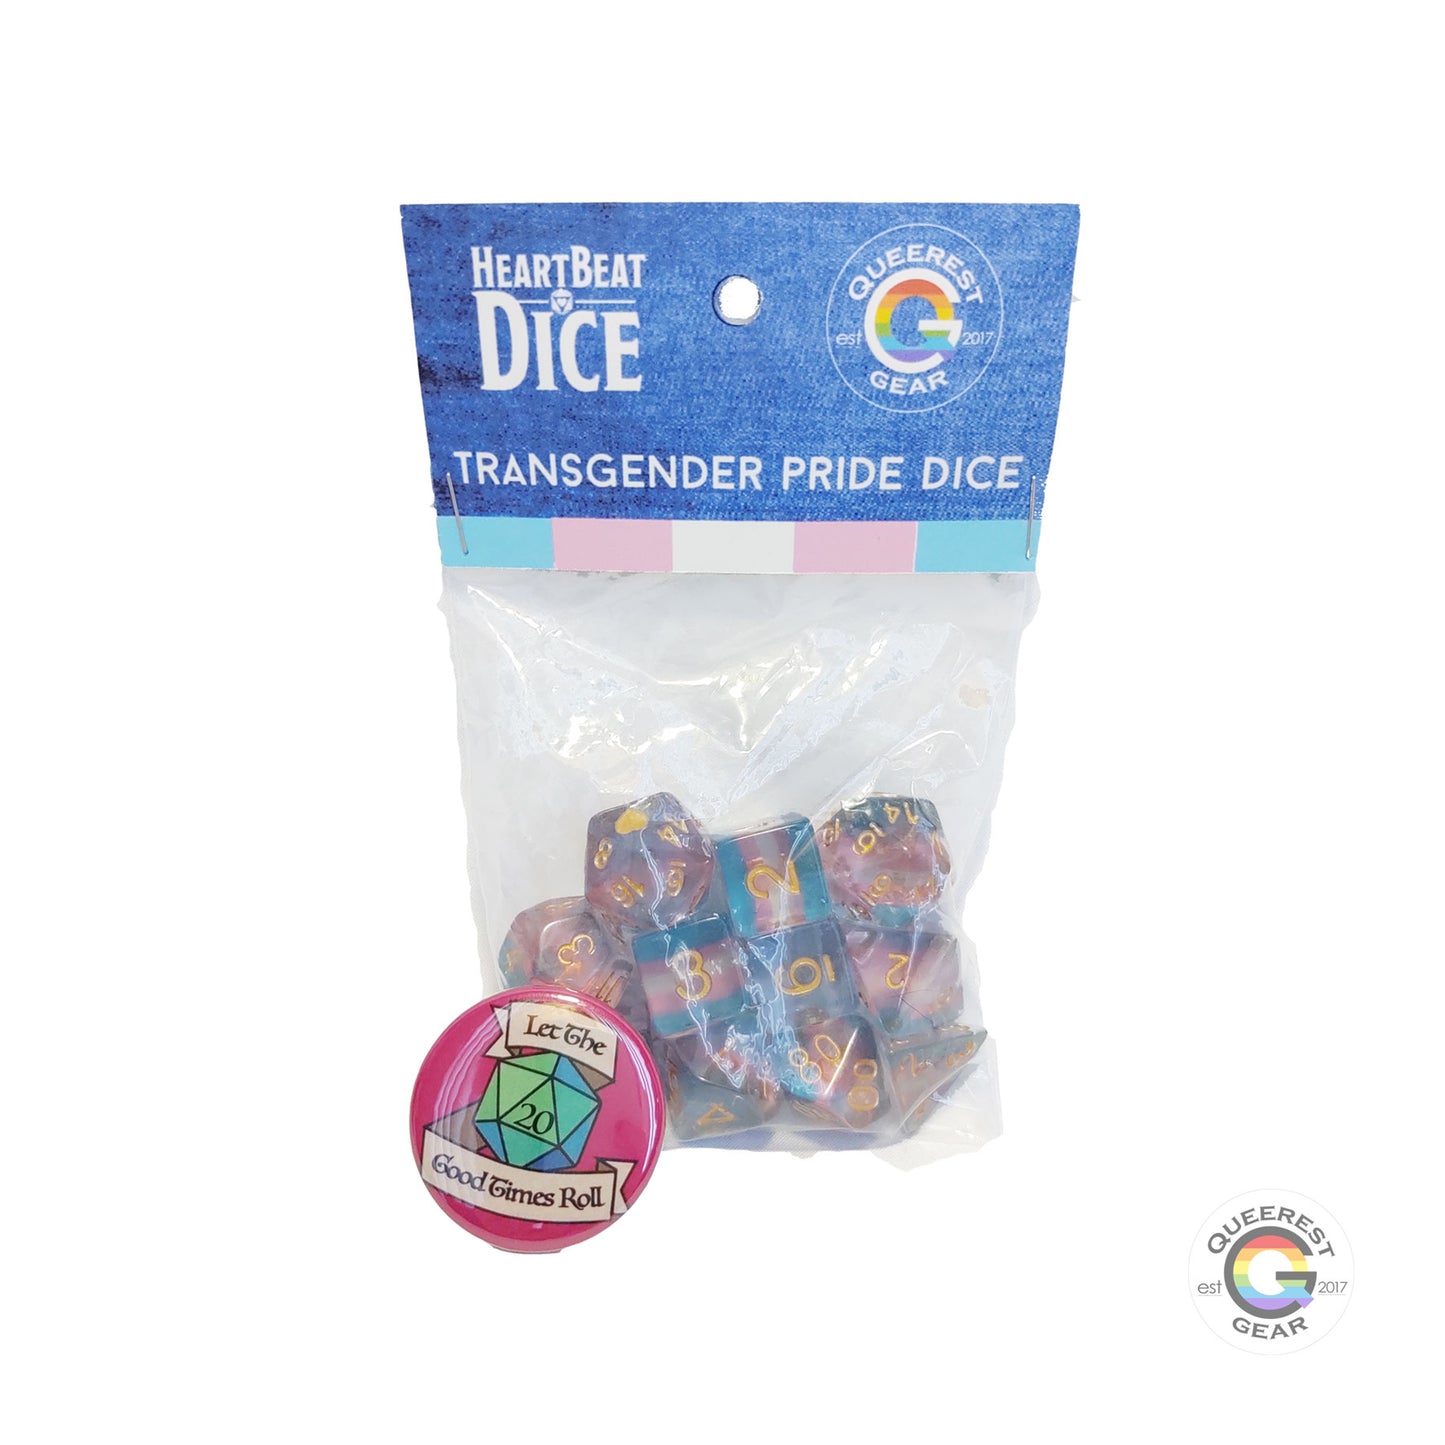 Transgender pride dice in their packaging with a free “let the good times roll” button